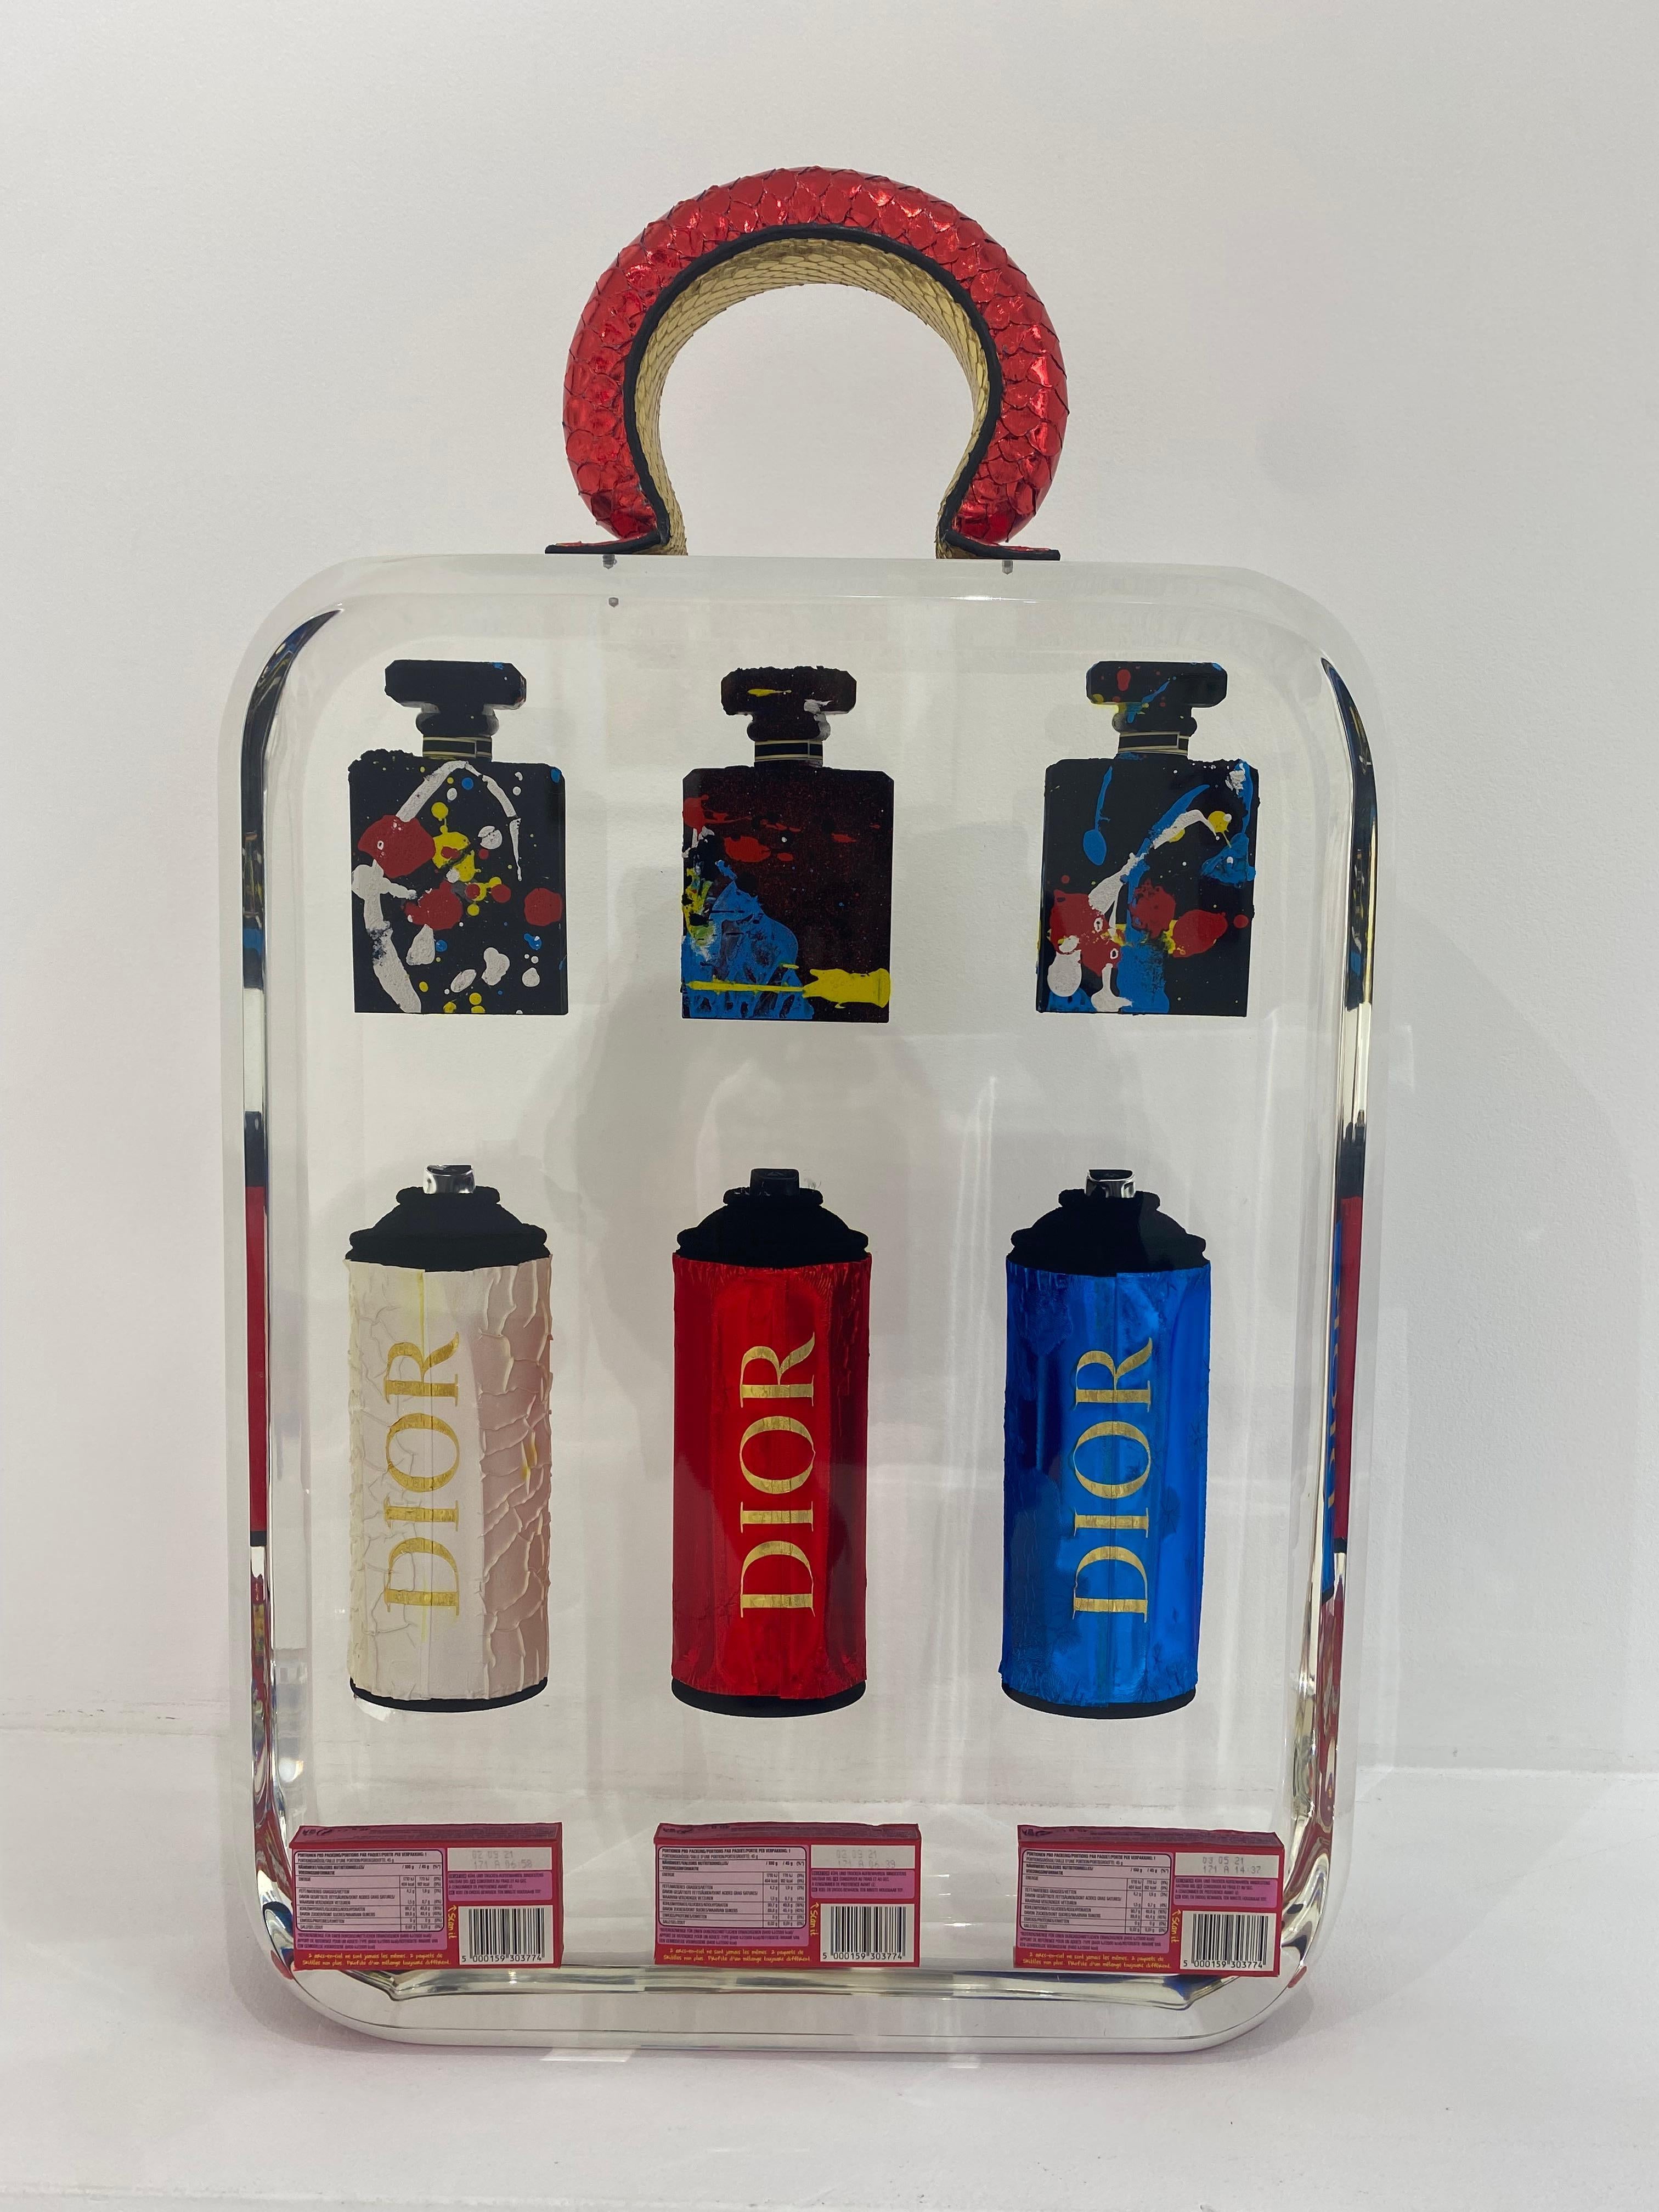 Fueled by themes of conspicuous consumption, luxury brands, and constructed identities, Fred Allard casts high fashion shopping bags filled with soda cans and bottles in resin. Influenced by ‘80s and ‘90s American pop culture and cosmopolitan